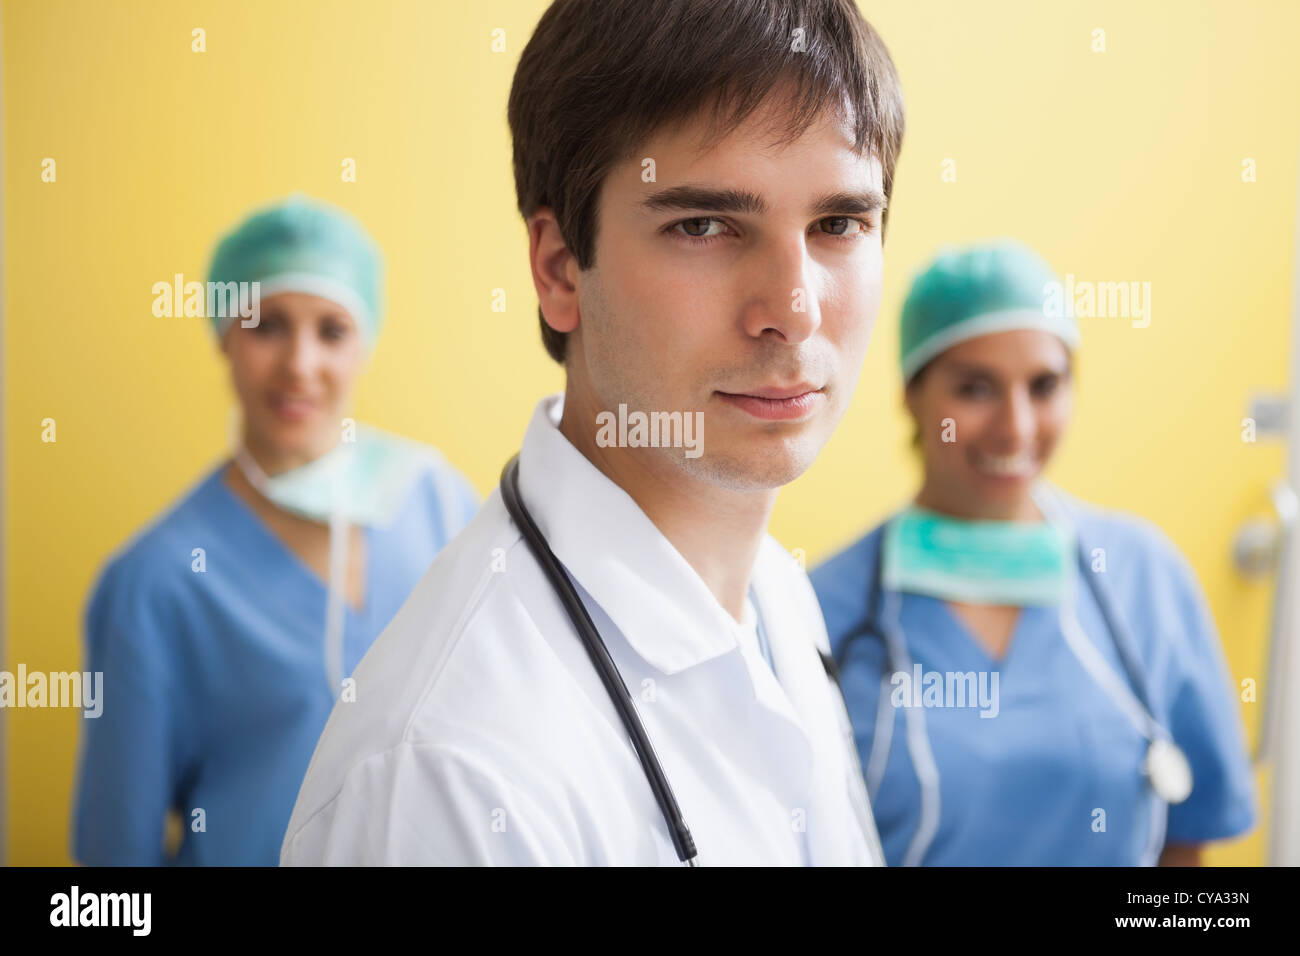 Doctor with two smiling nurses Stock Photo